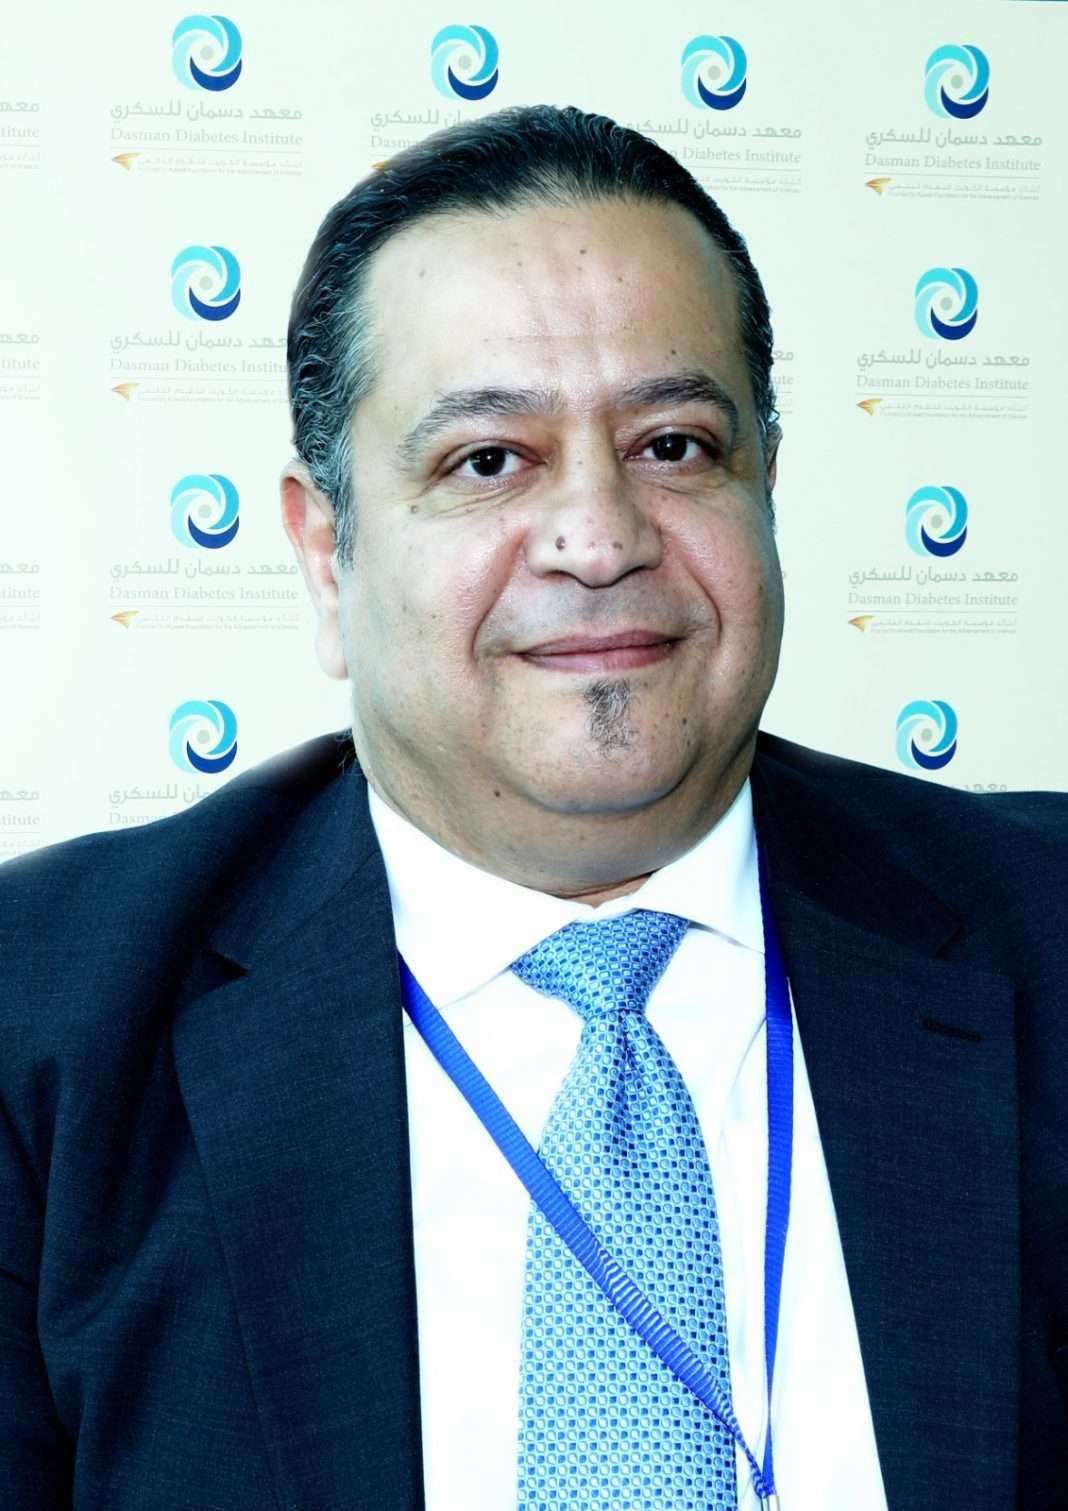 researchers-at-dasman-diabetes-institute-urge-policy-makers-around-the-world-to-speed-up-the-vaccination-process_kuwait